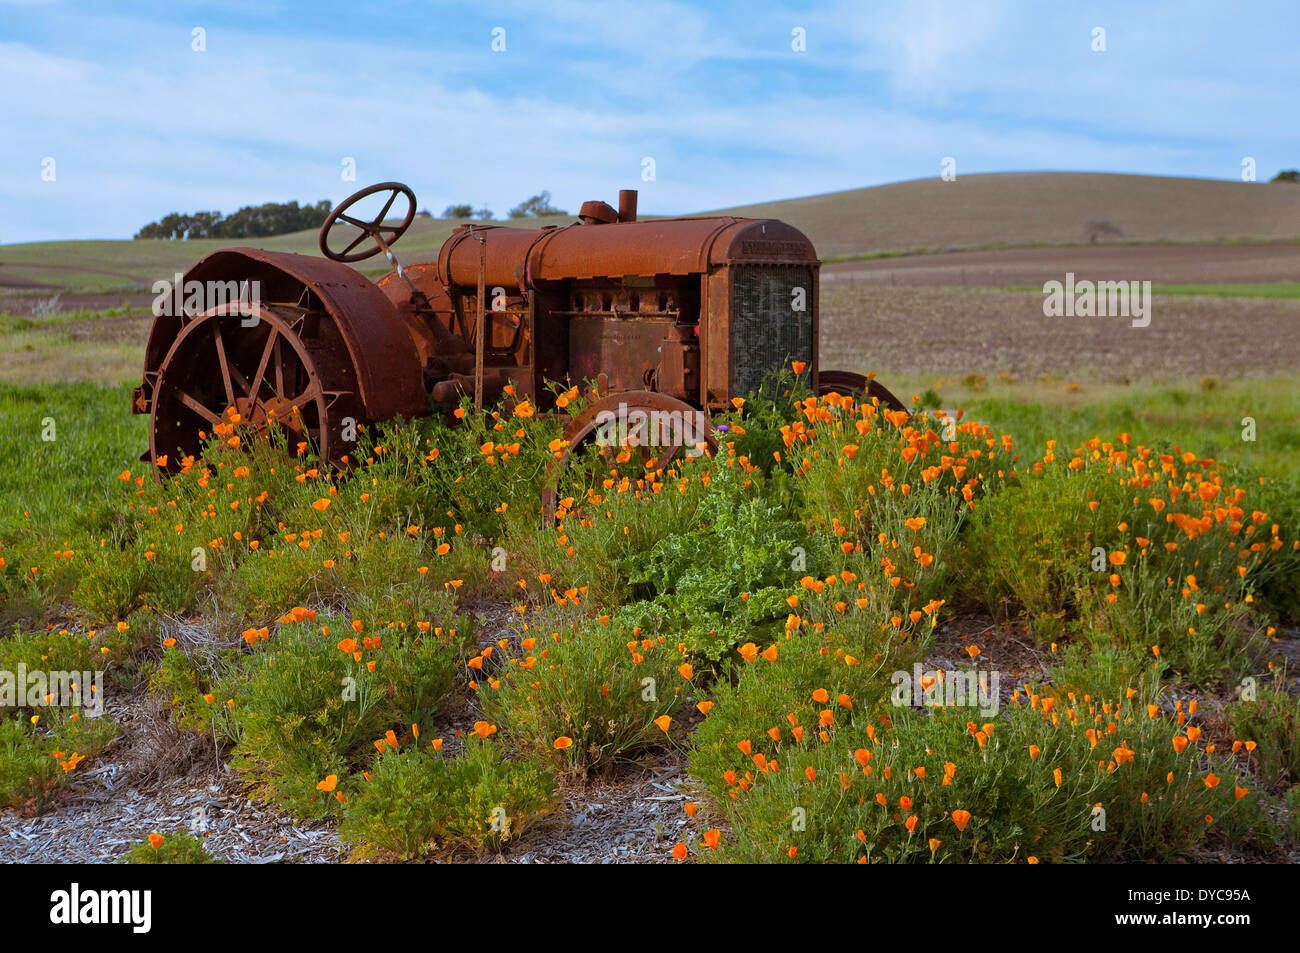 California poppies and a tractor. Stock Photo